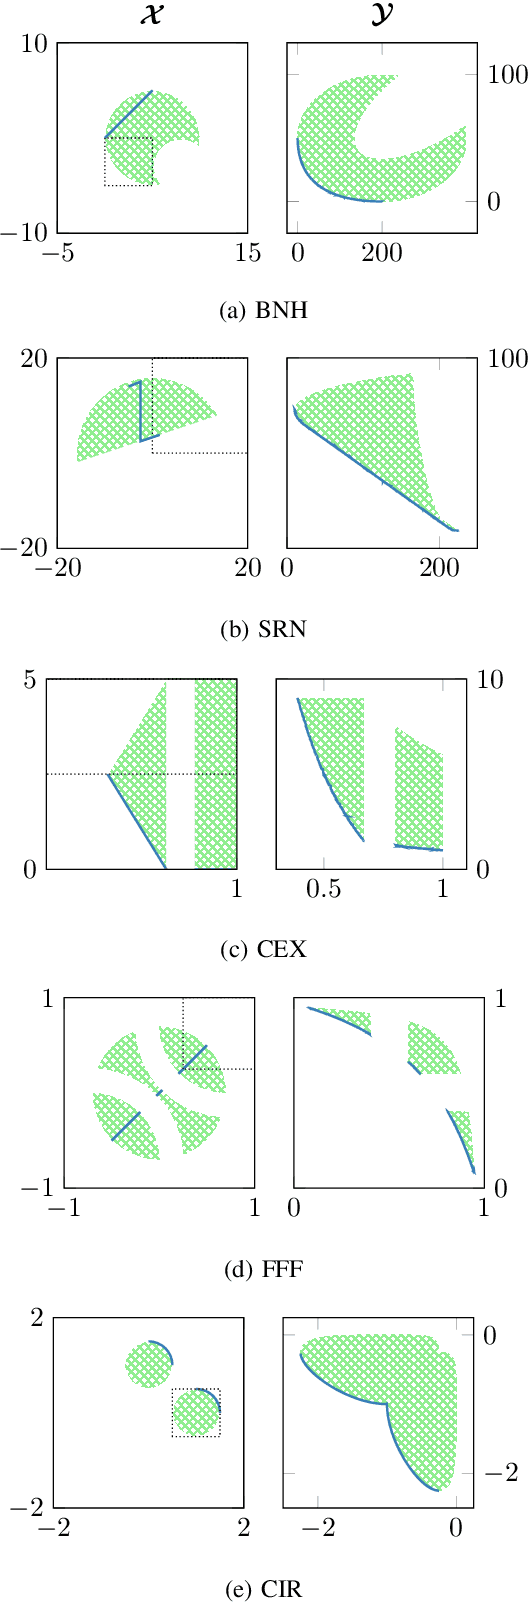 Figure 2 for Adaptive Sampling of Pareto Frontiers with Binary Constraints Using Regression and Classification